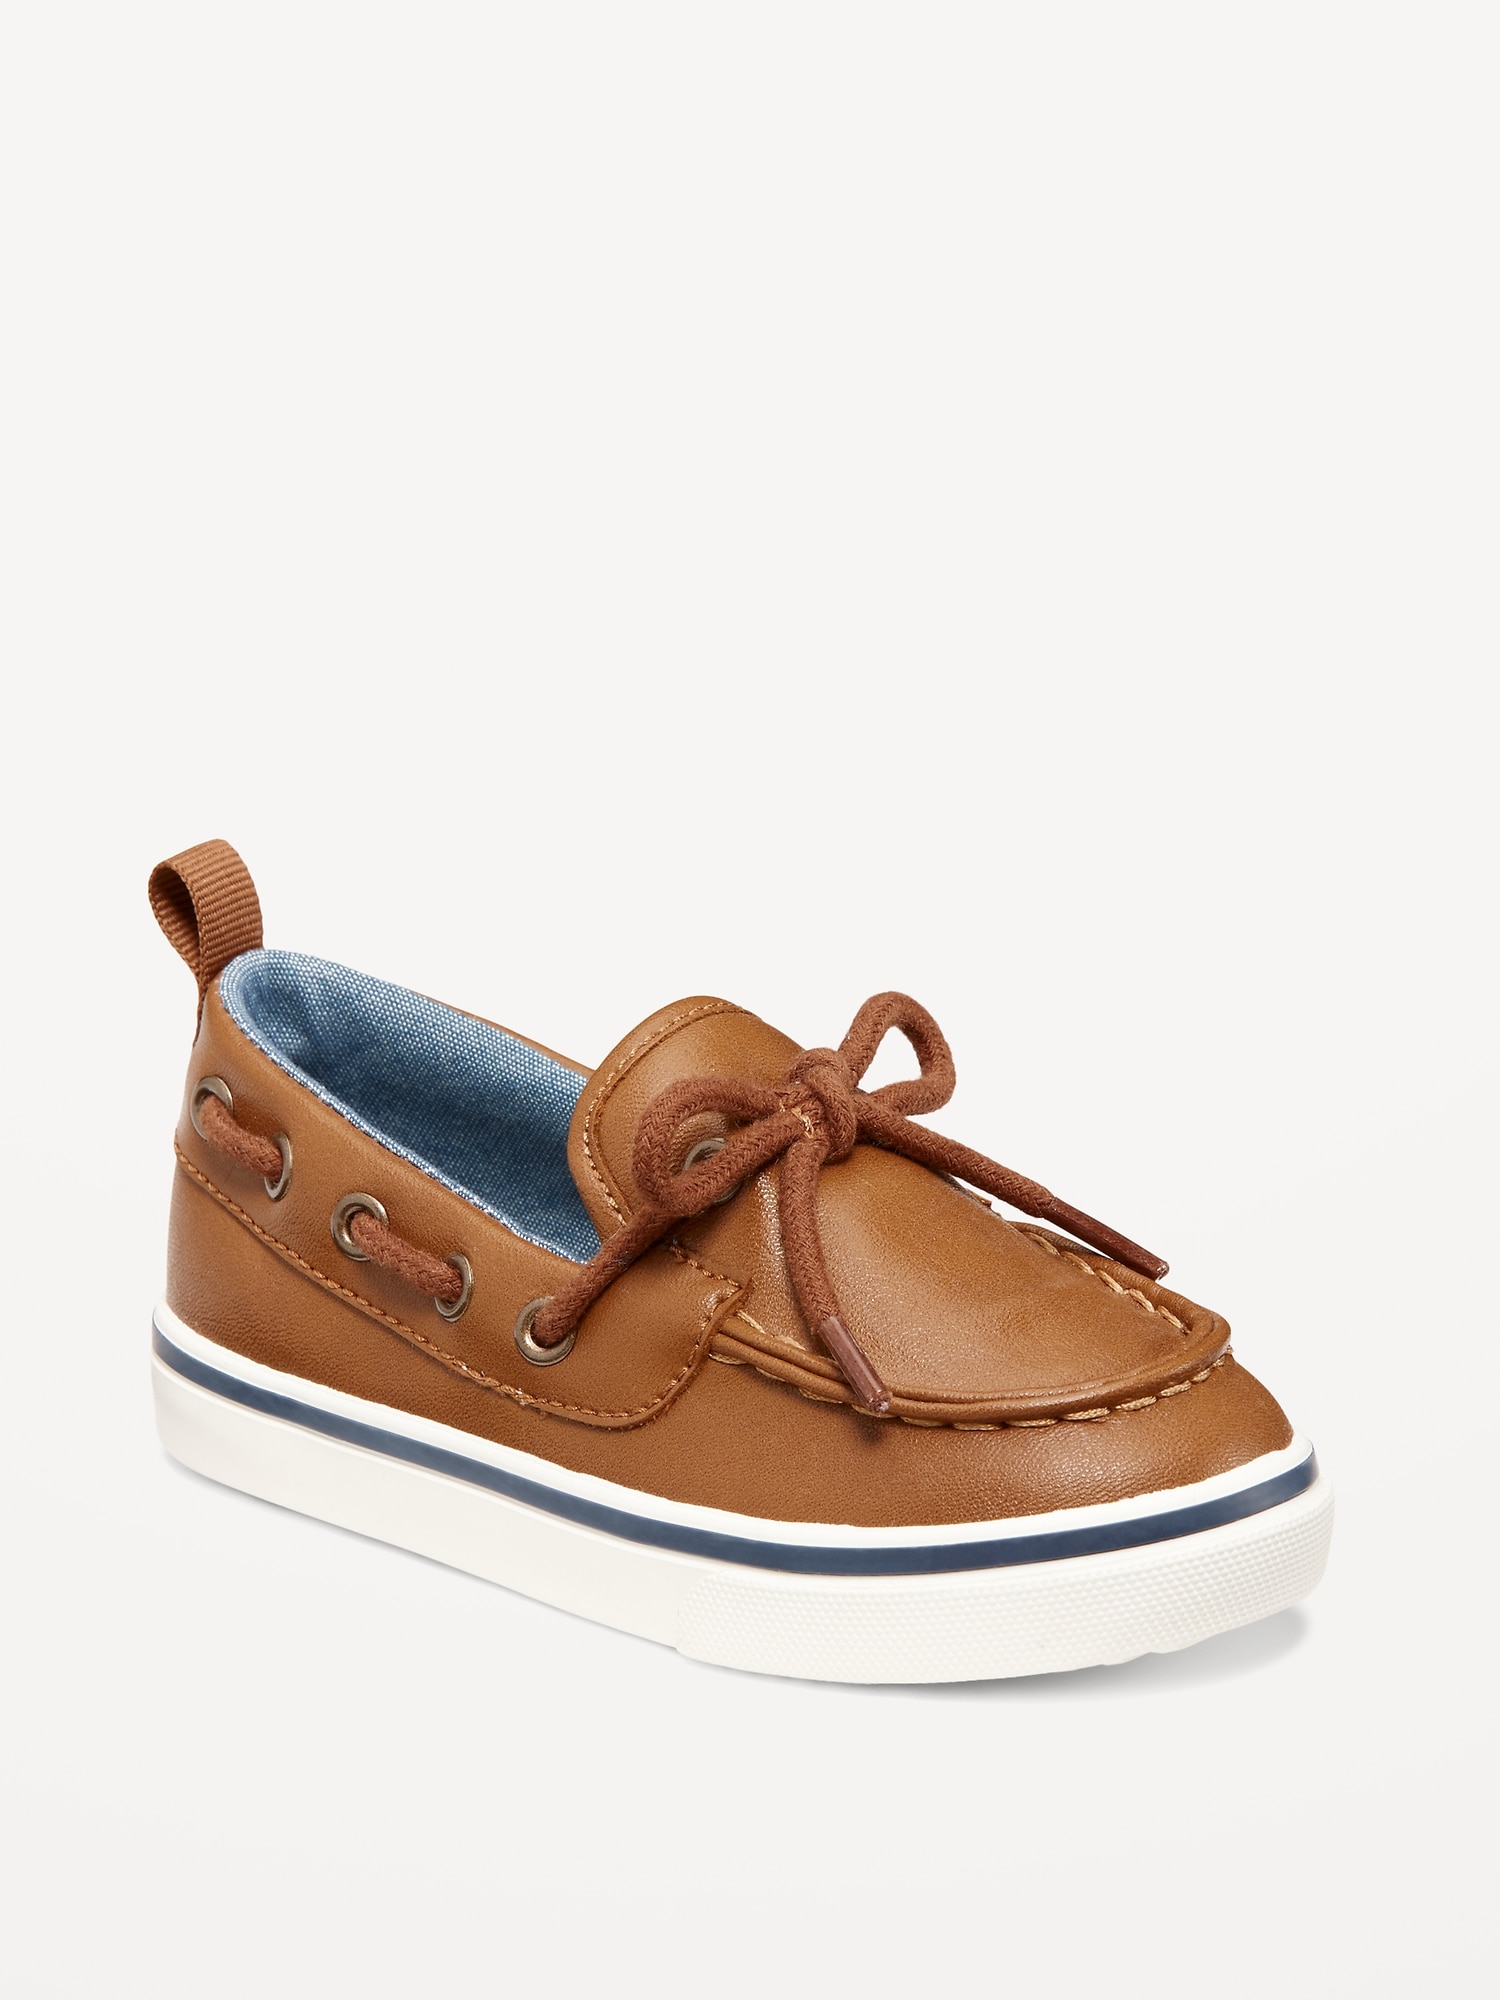 Old Navy Faux-Leather Boat Shoes for Toddler Boys brown. 1